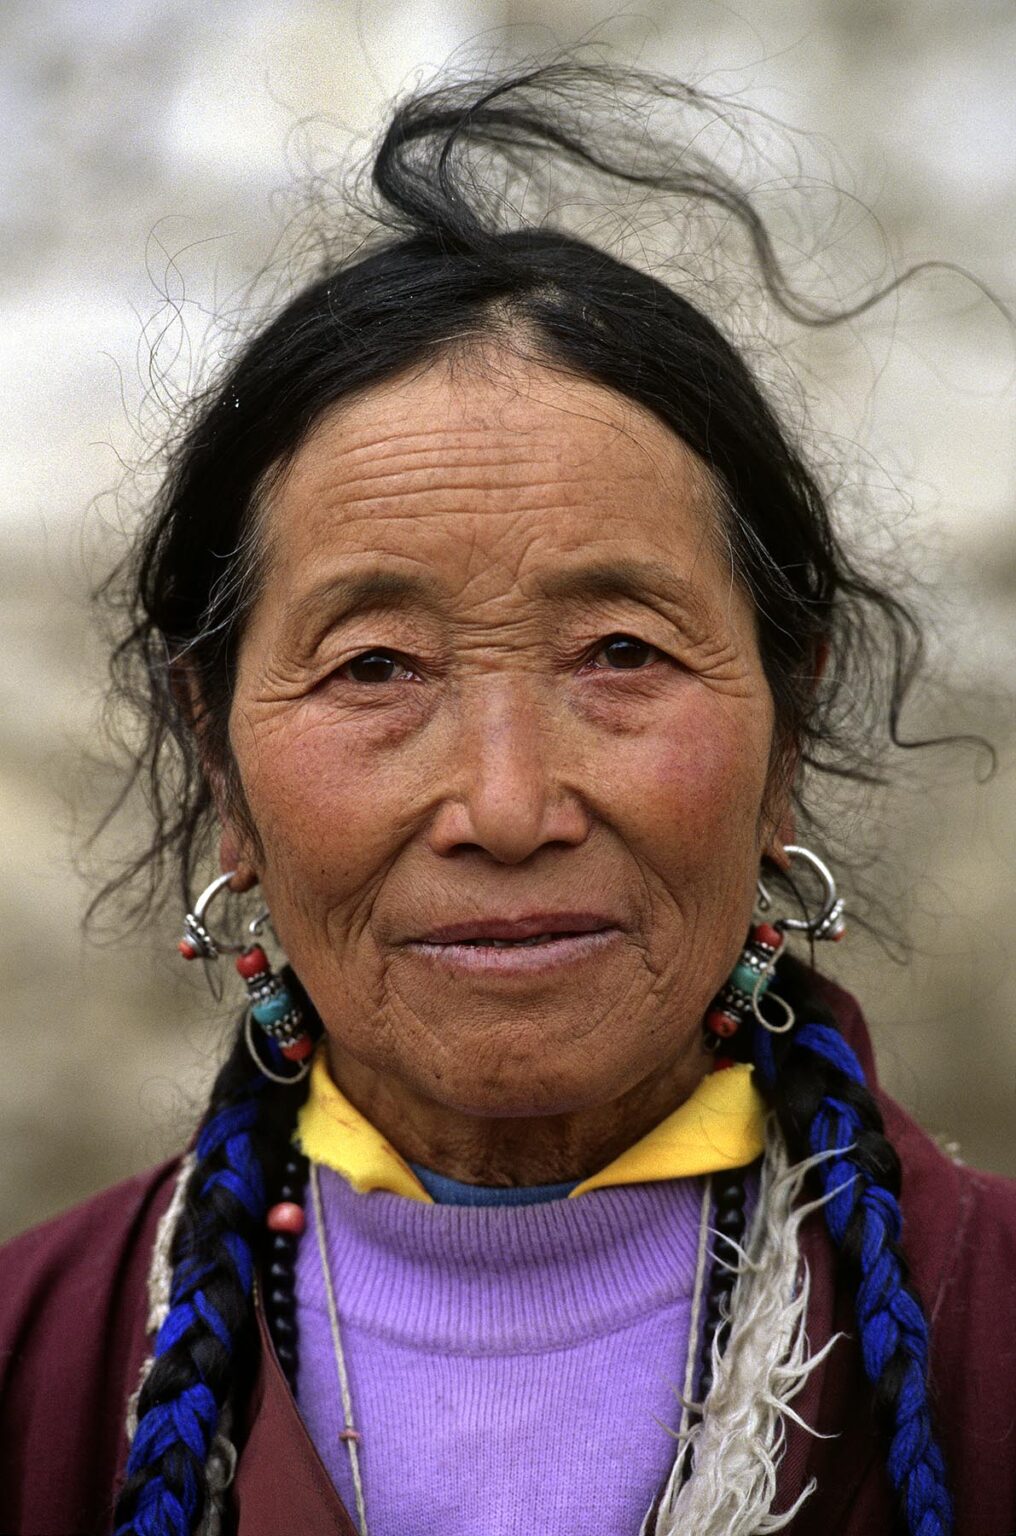 A woman from AMDO visit Samye Monastery as part of her religious pilgrimage - CENTRAL TIBET